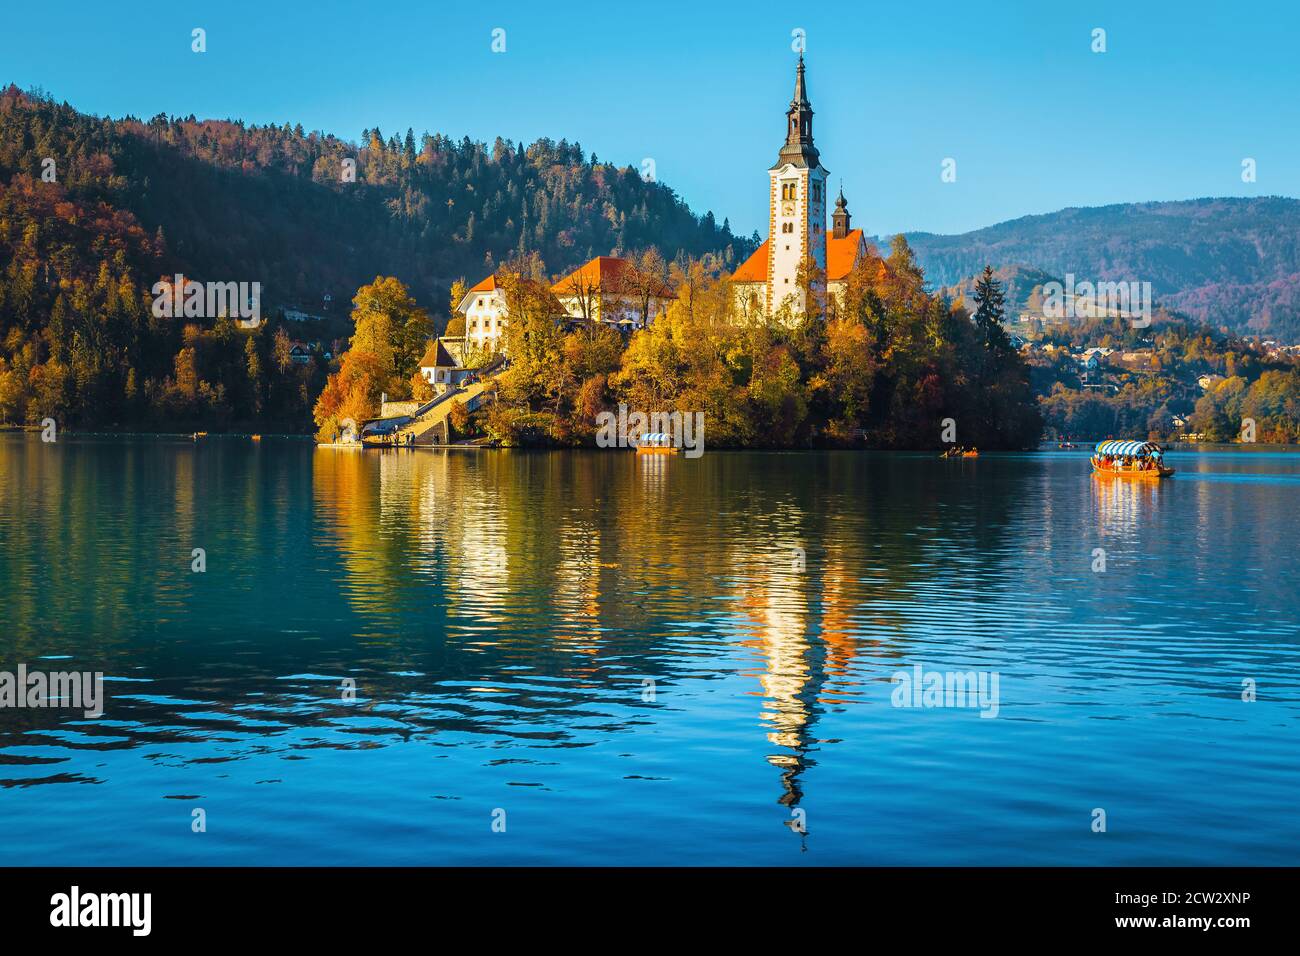 Popular travel and excursion destination at autumn. Amazing lake Bled with picturesque Pilgrimage church on the small island, Bled, Slovenia, Europe Stock Photo